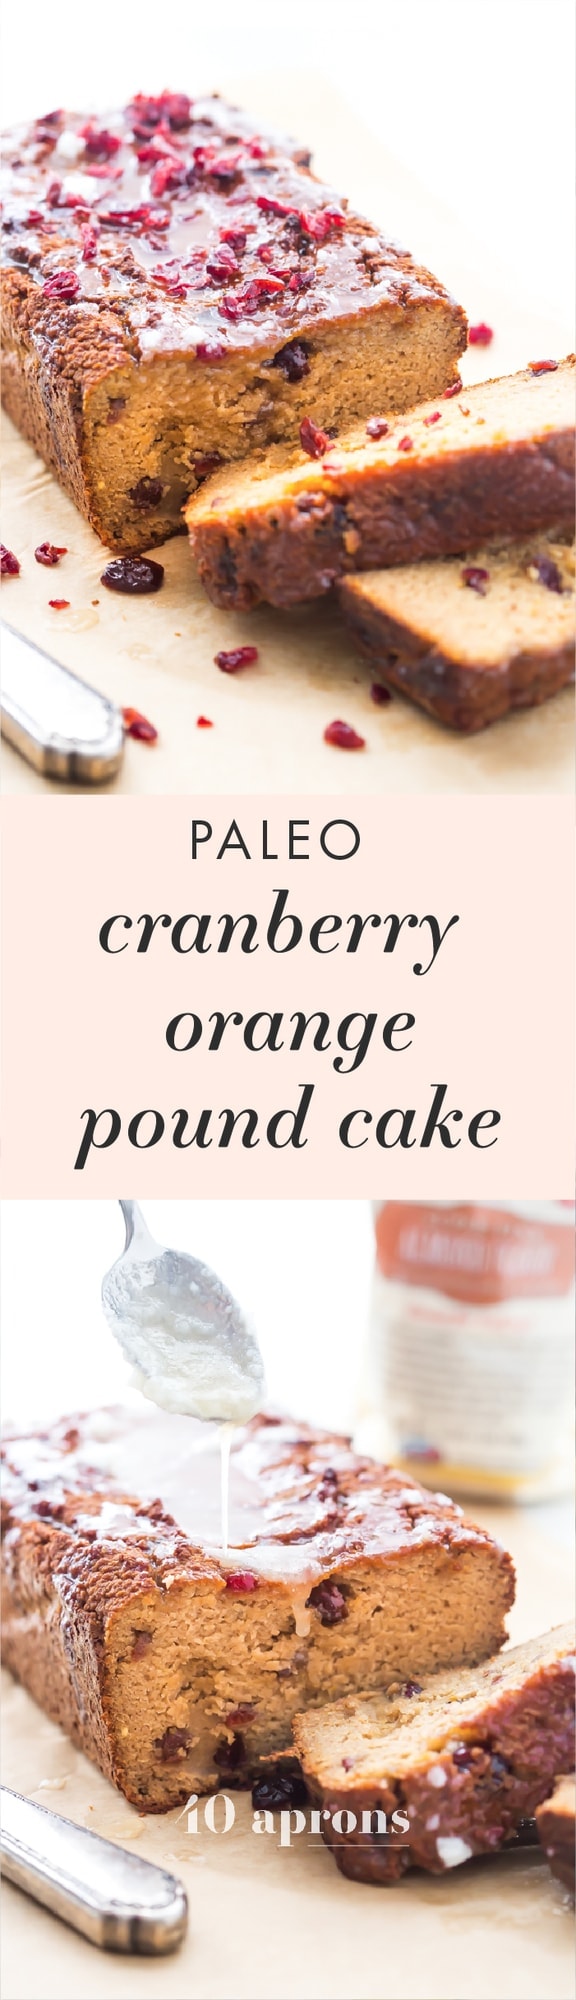 This paleo cranberry orange pound cake is such a wonderful paleo fall recipe! With fresh orange flavor and sweet-tart dried cranberries, this paleo cranberry orange pound cake is tender, moist, and full of flavor. This paleo cranberry orange pound cake takes full advantage of such a fantastic flavor combo and uses all healthier ingredients to make a lovely paleo fall recipe! 